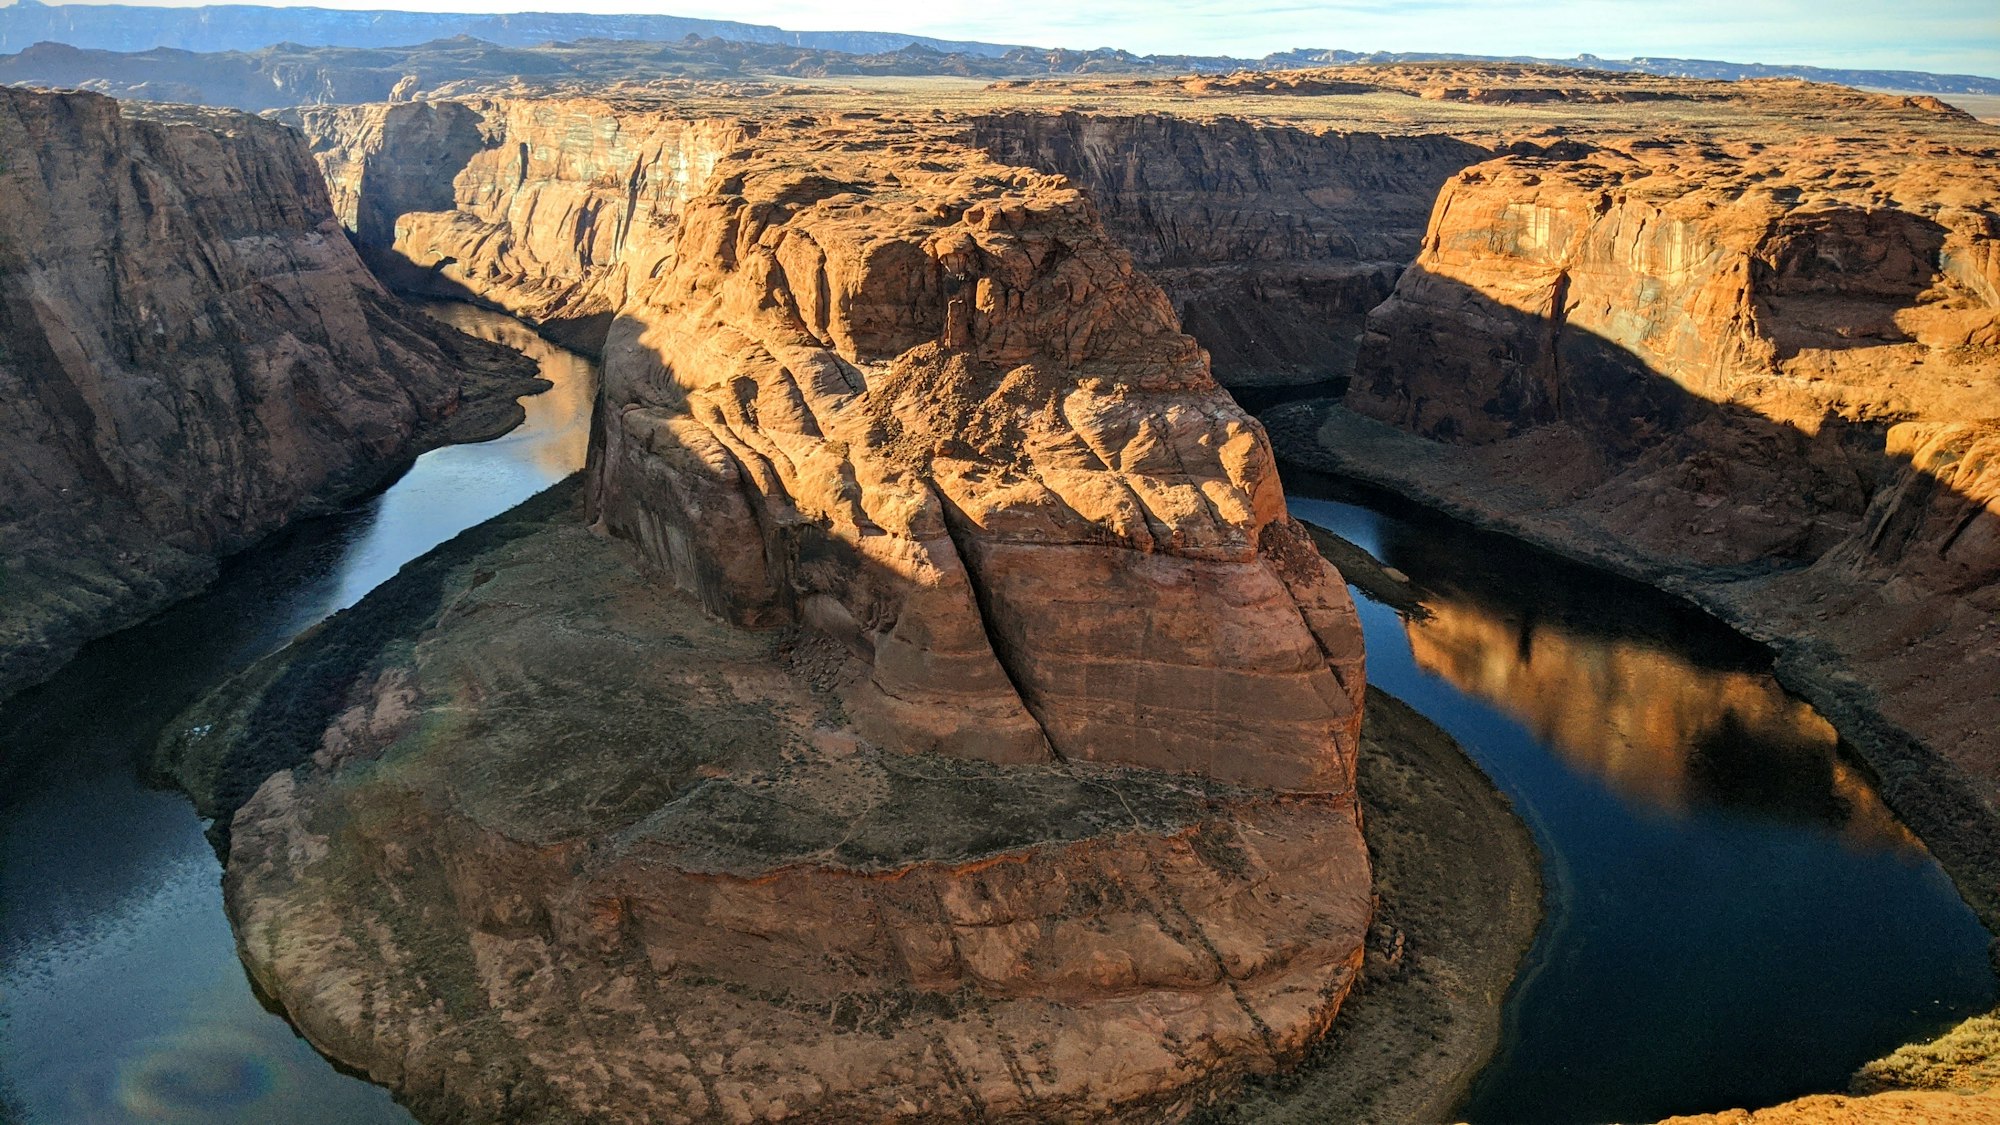 Great view of Horseshoe Bend